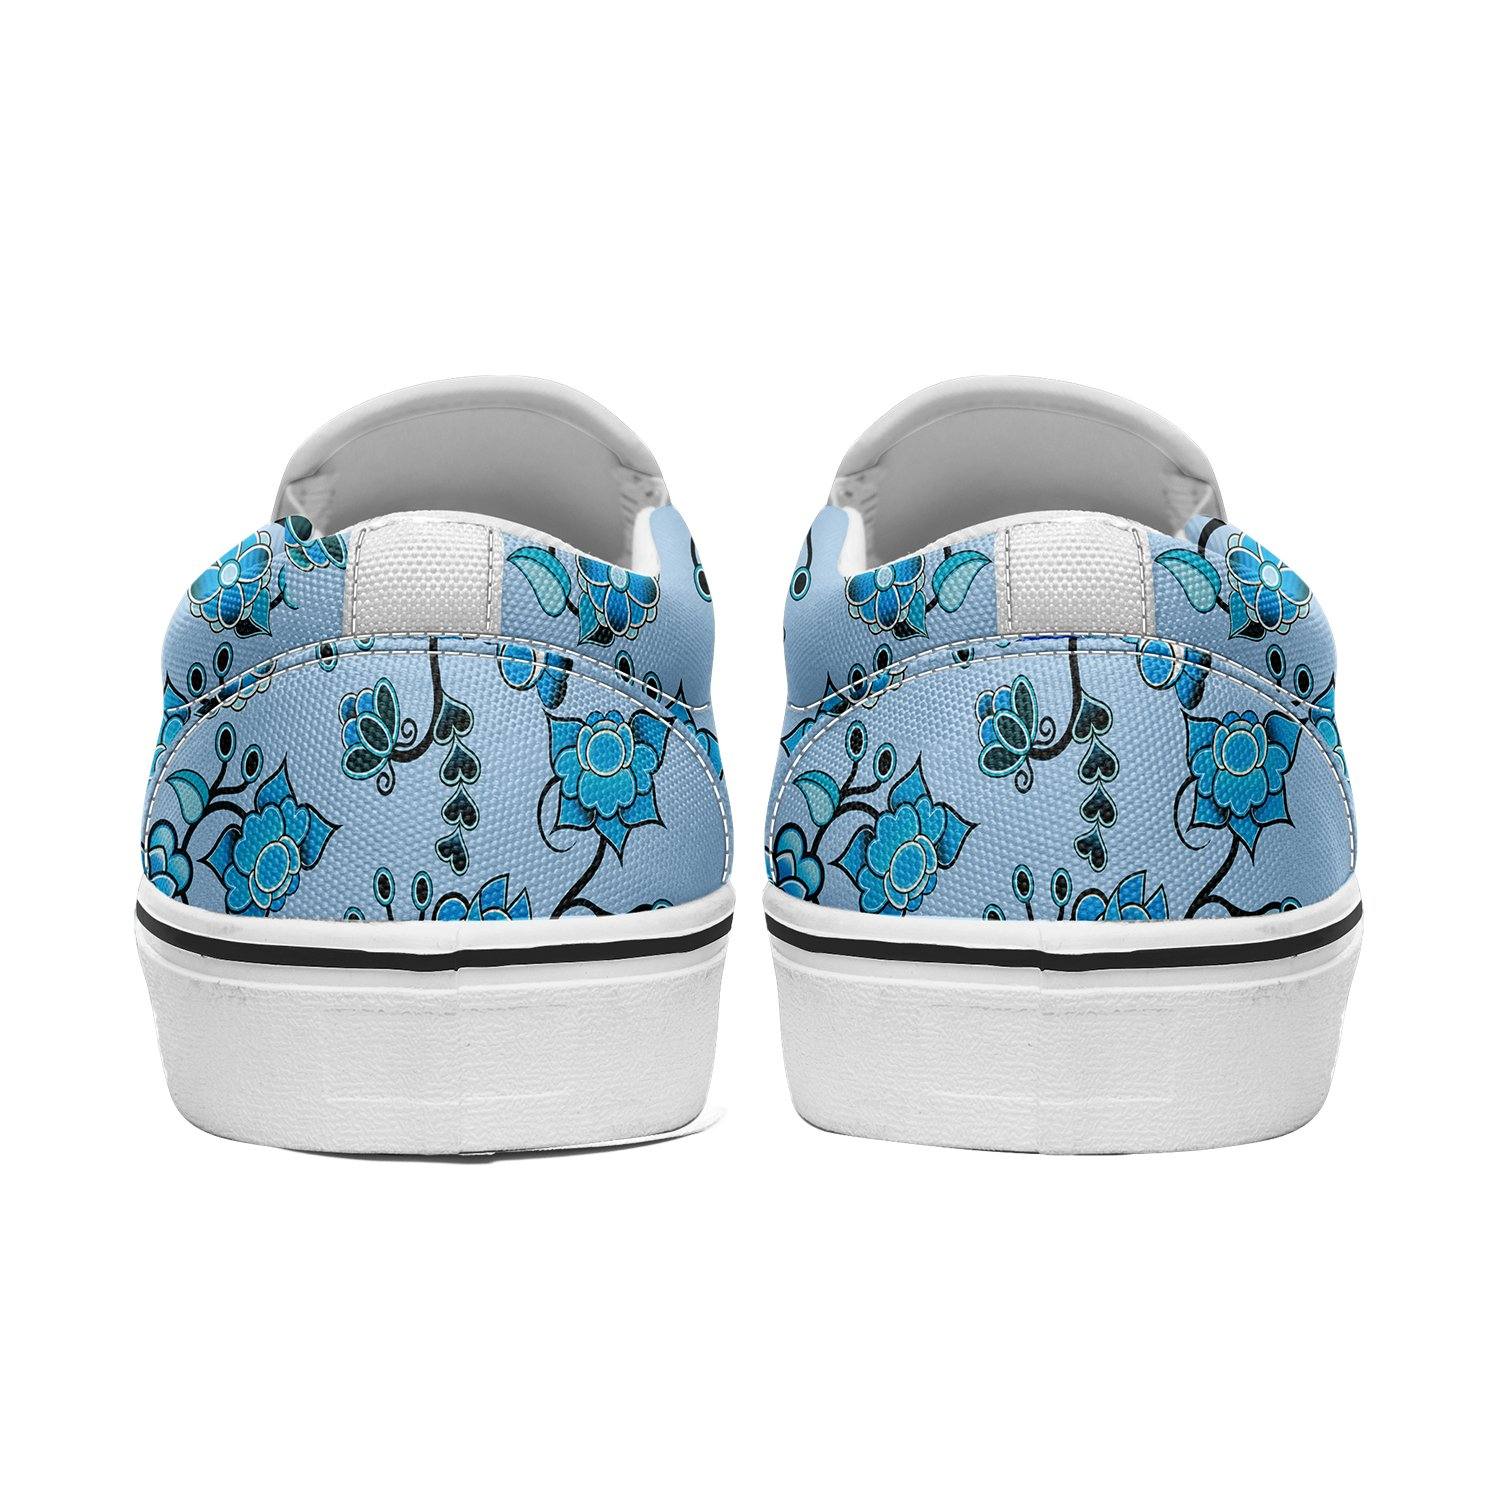 Blue Floral Amour Otoyimm Canvas Slip On Shoes otoyimm Herman 